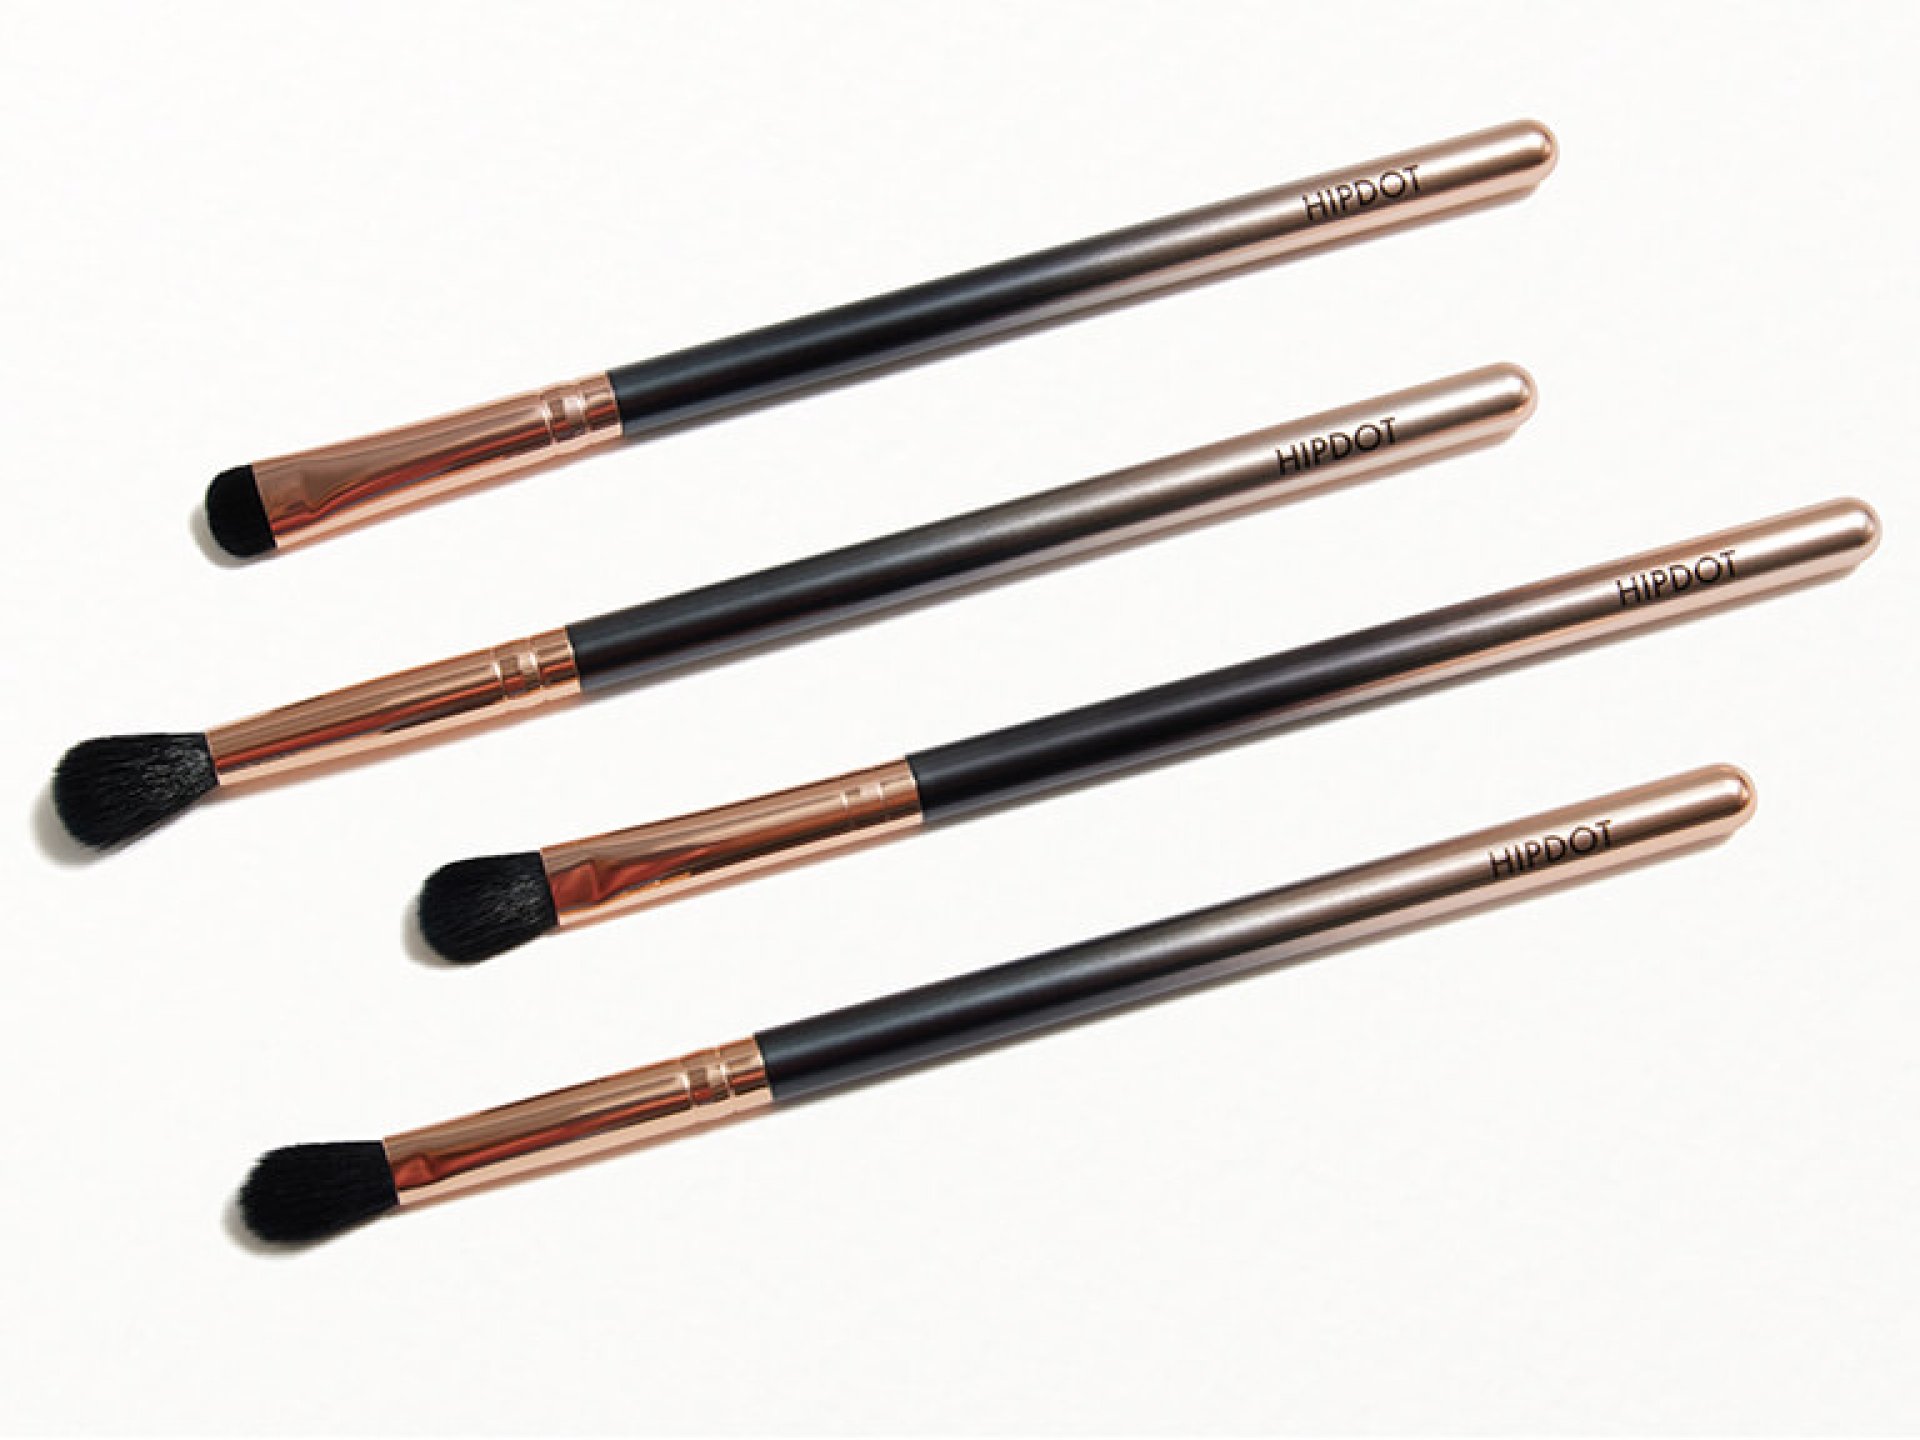 HIPDOT All in One 4 Piece Brush Set